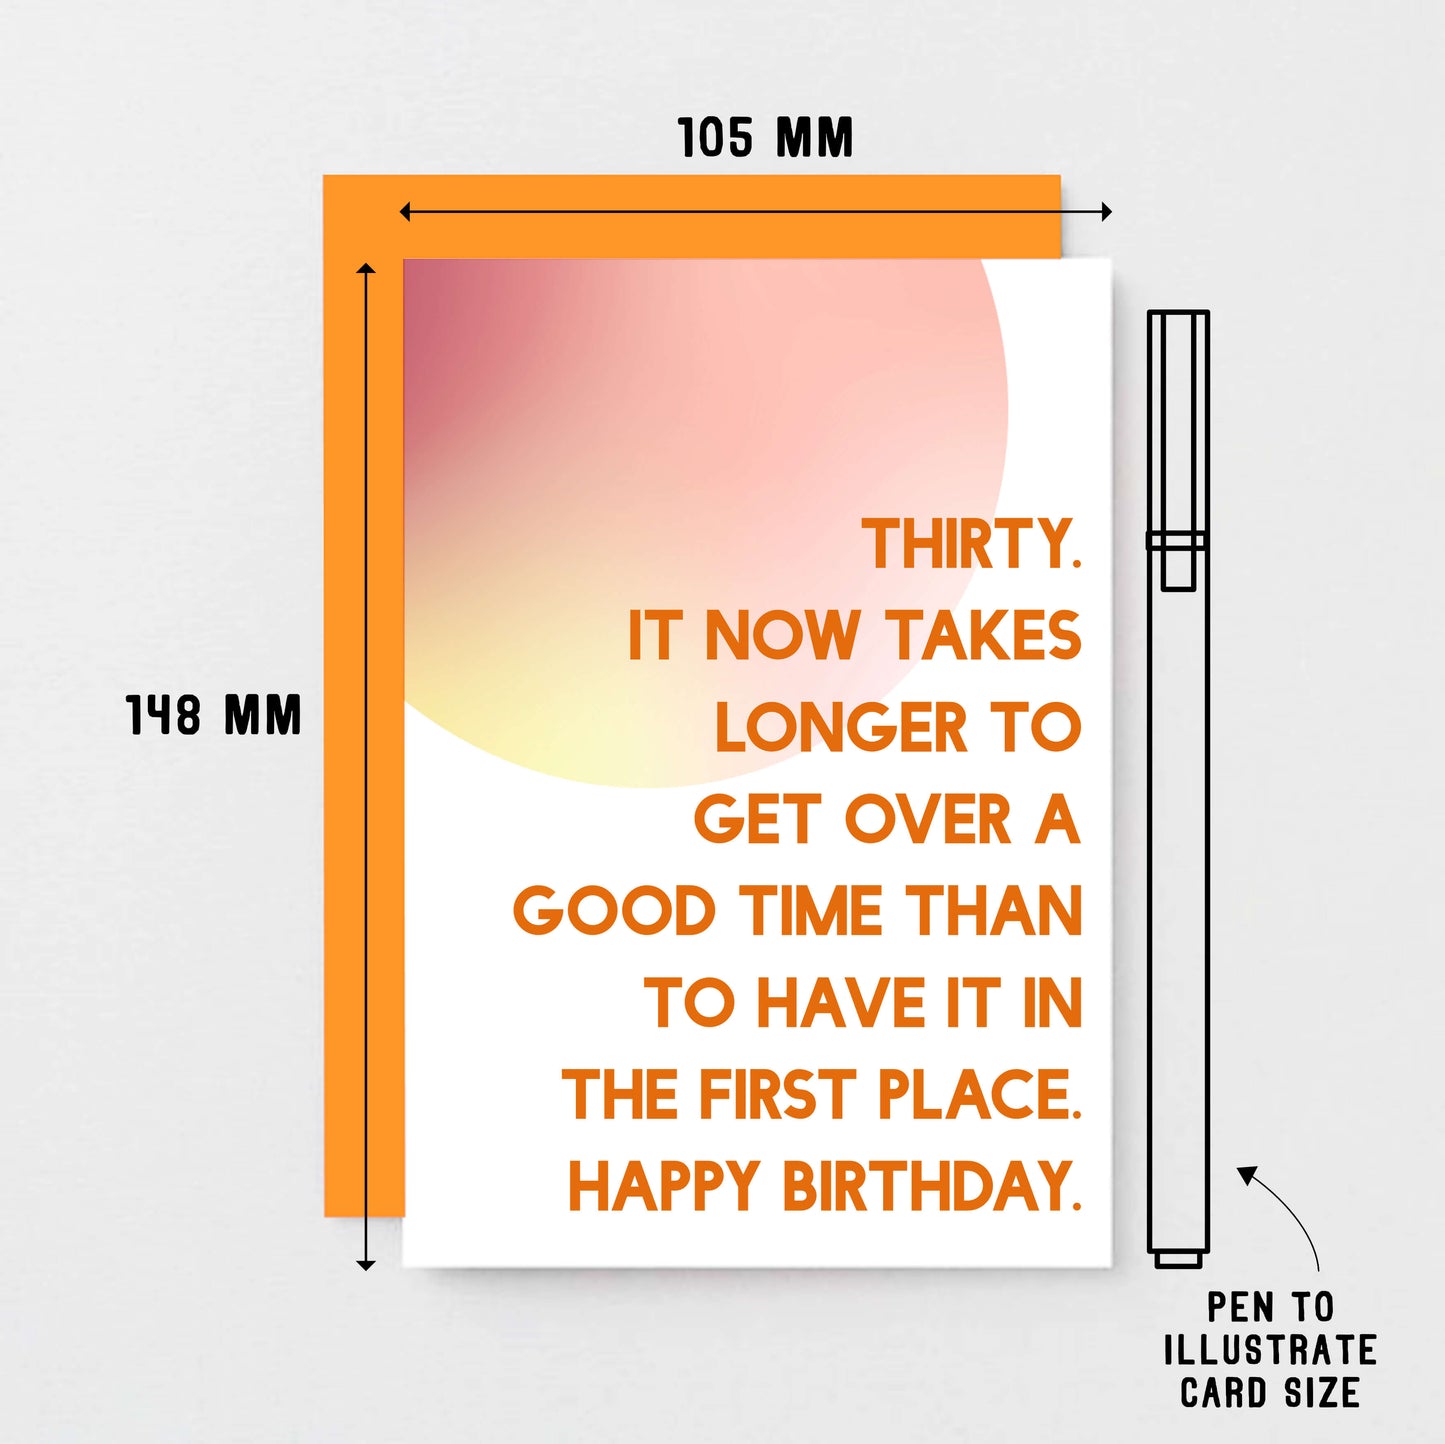 30th Birthday Card by SixElevenCreations. Reads Thirty. It now takes longer to get over a good time than to have it in the first place. Happy birthday. Product Code SE2054A6